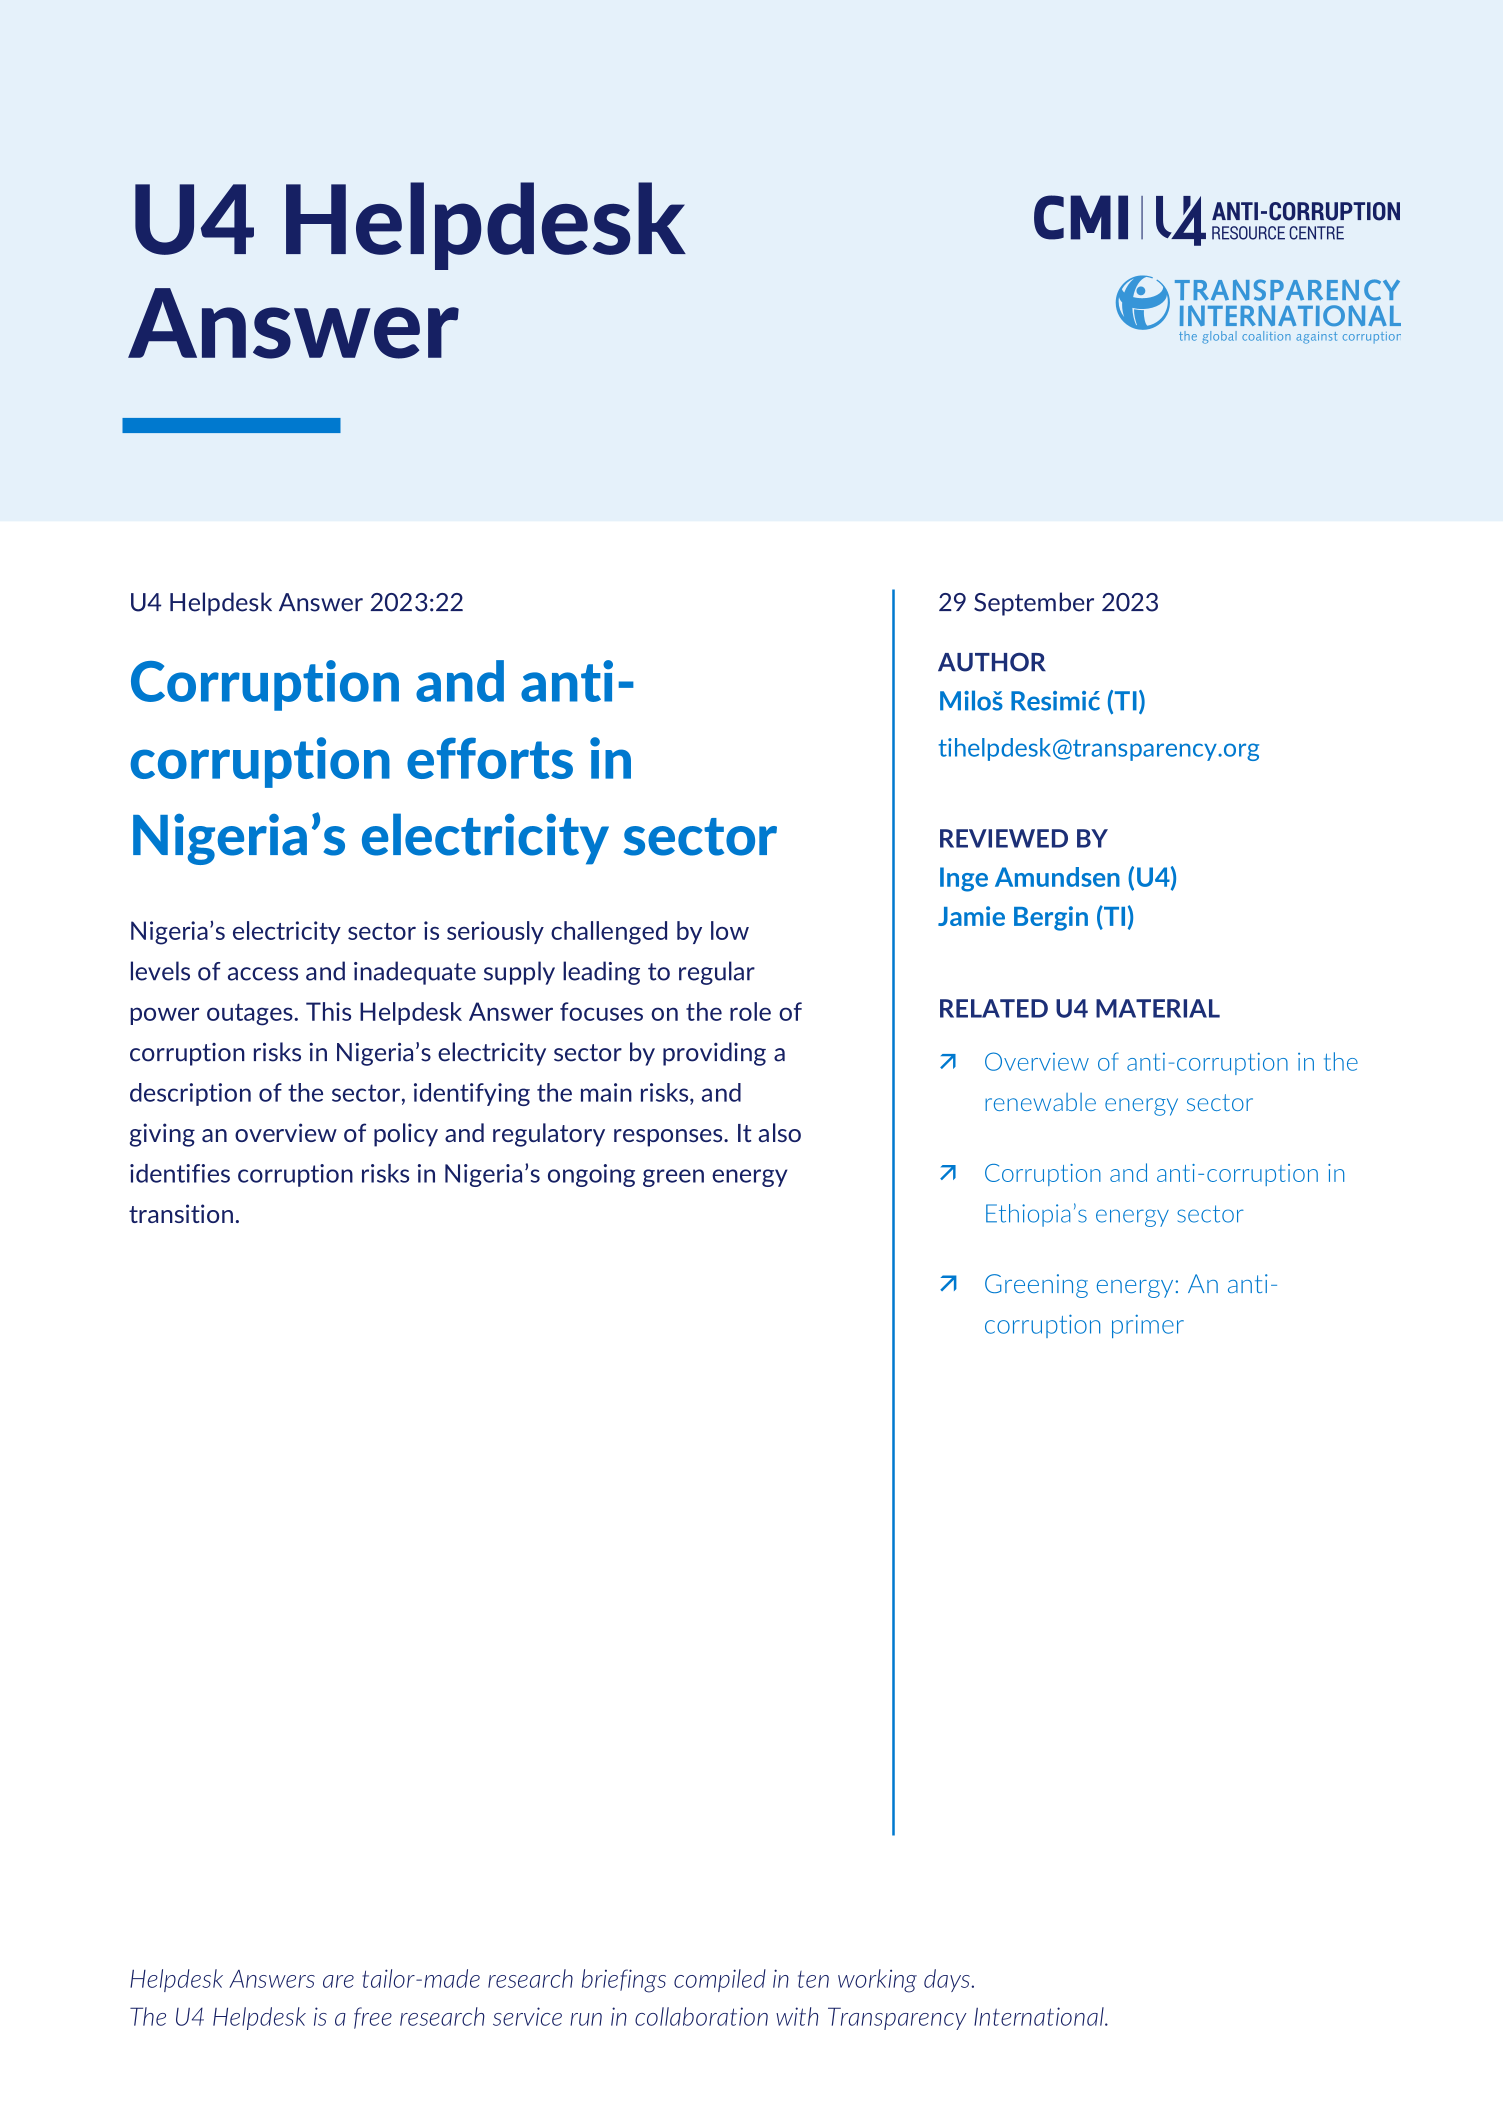 Corruption and anti-corruption efforts in Nigeria’s electricity sector